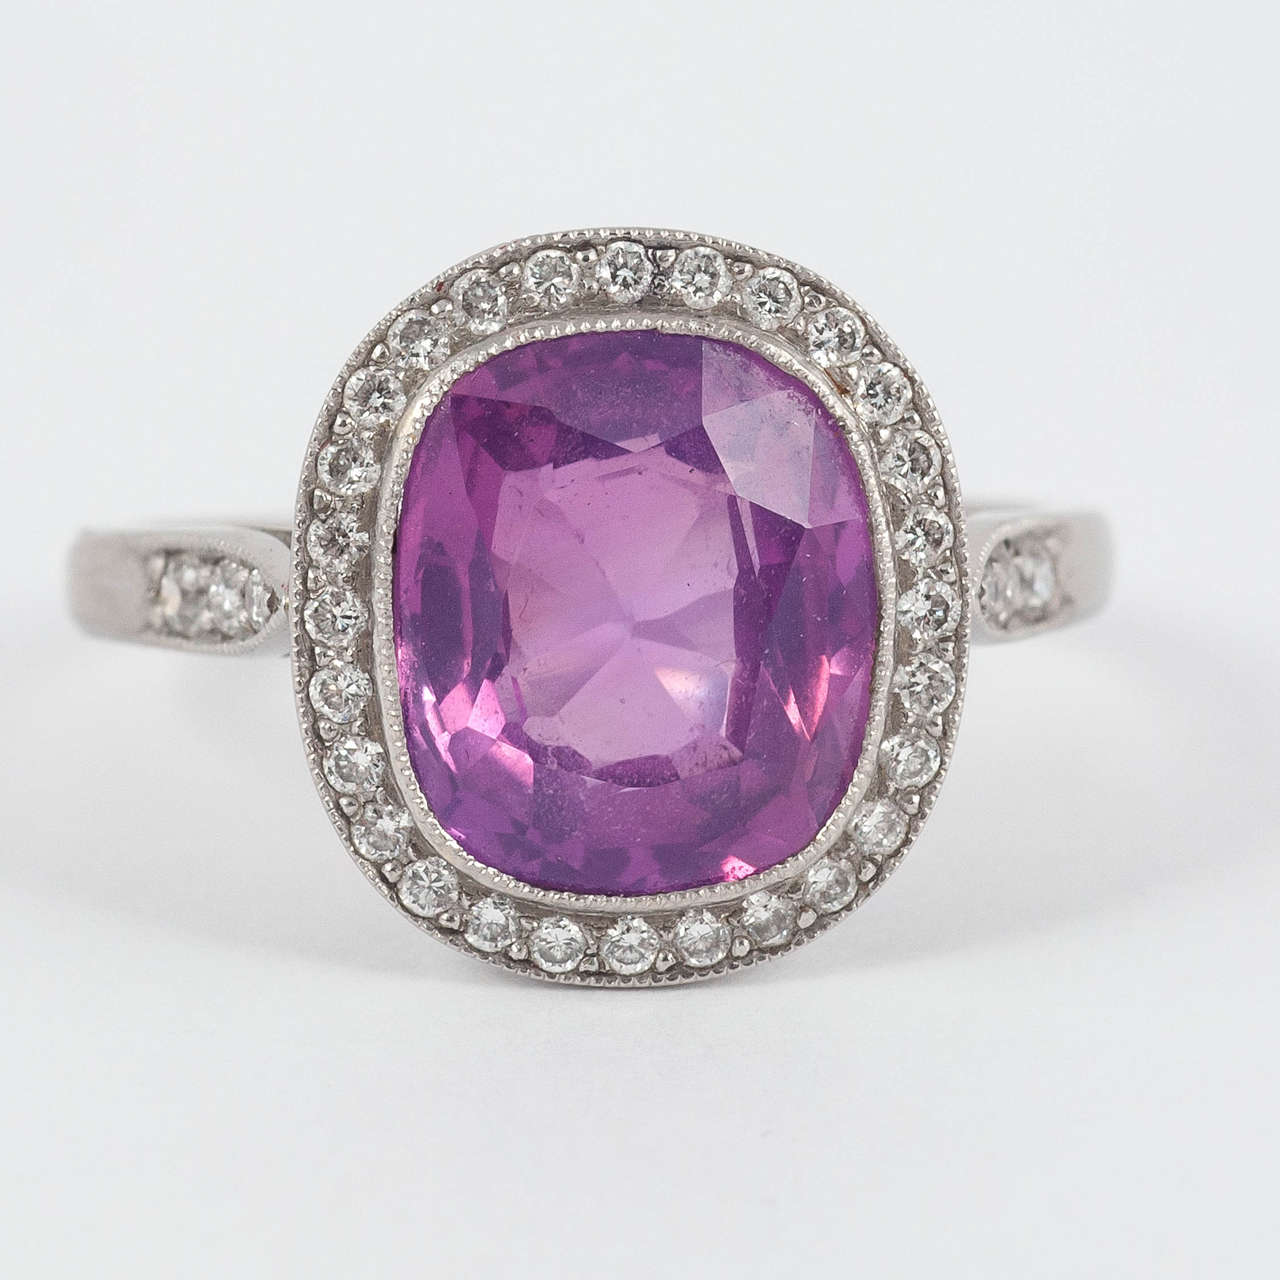 Fine natural pink cushion shaped Sapphire of Ceylon origin surrounded by Diamonds and set in Platinum

Finger size M 1/2